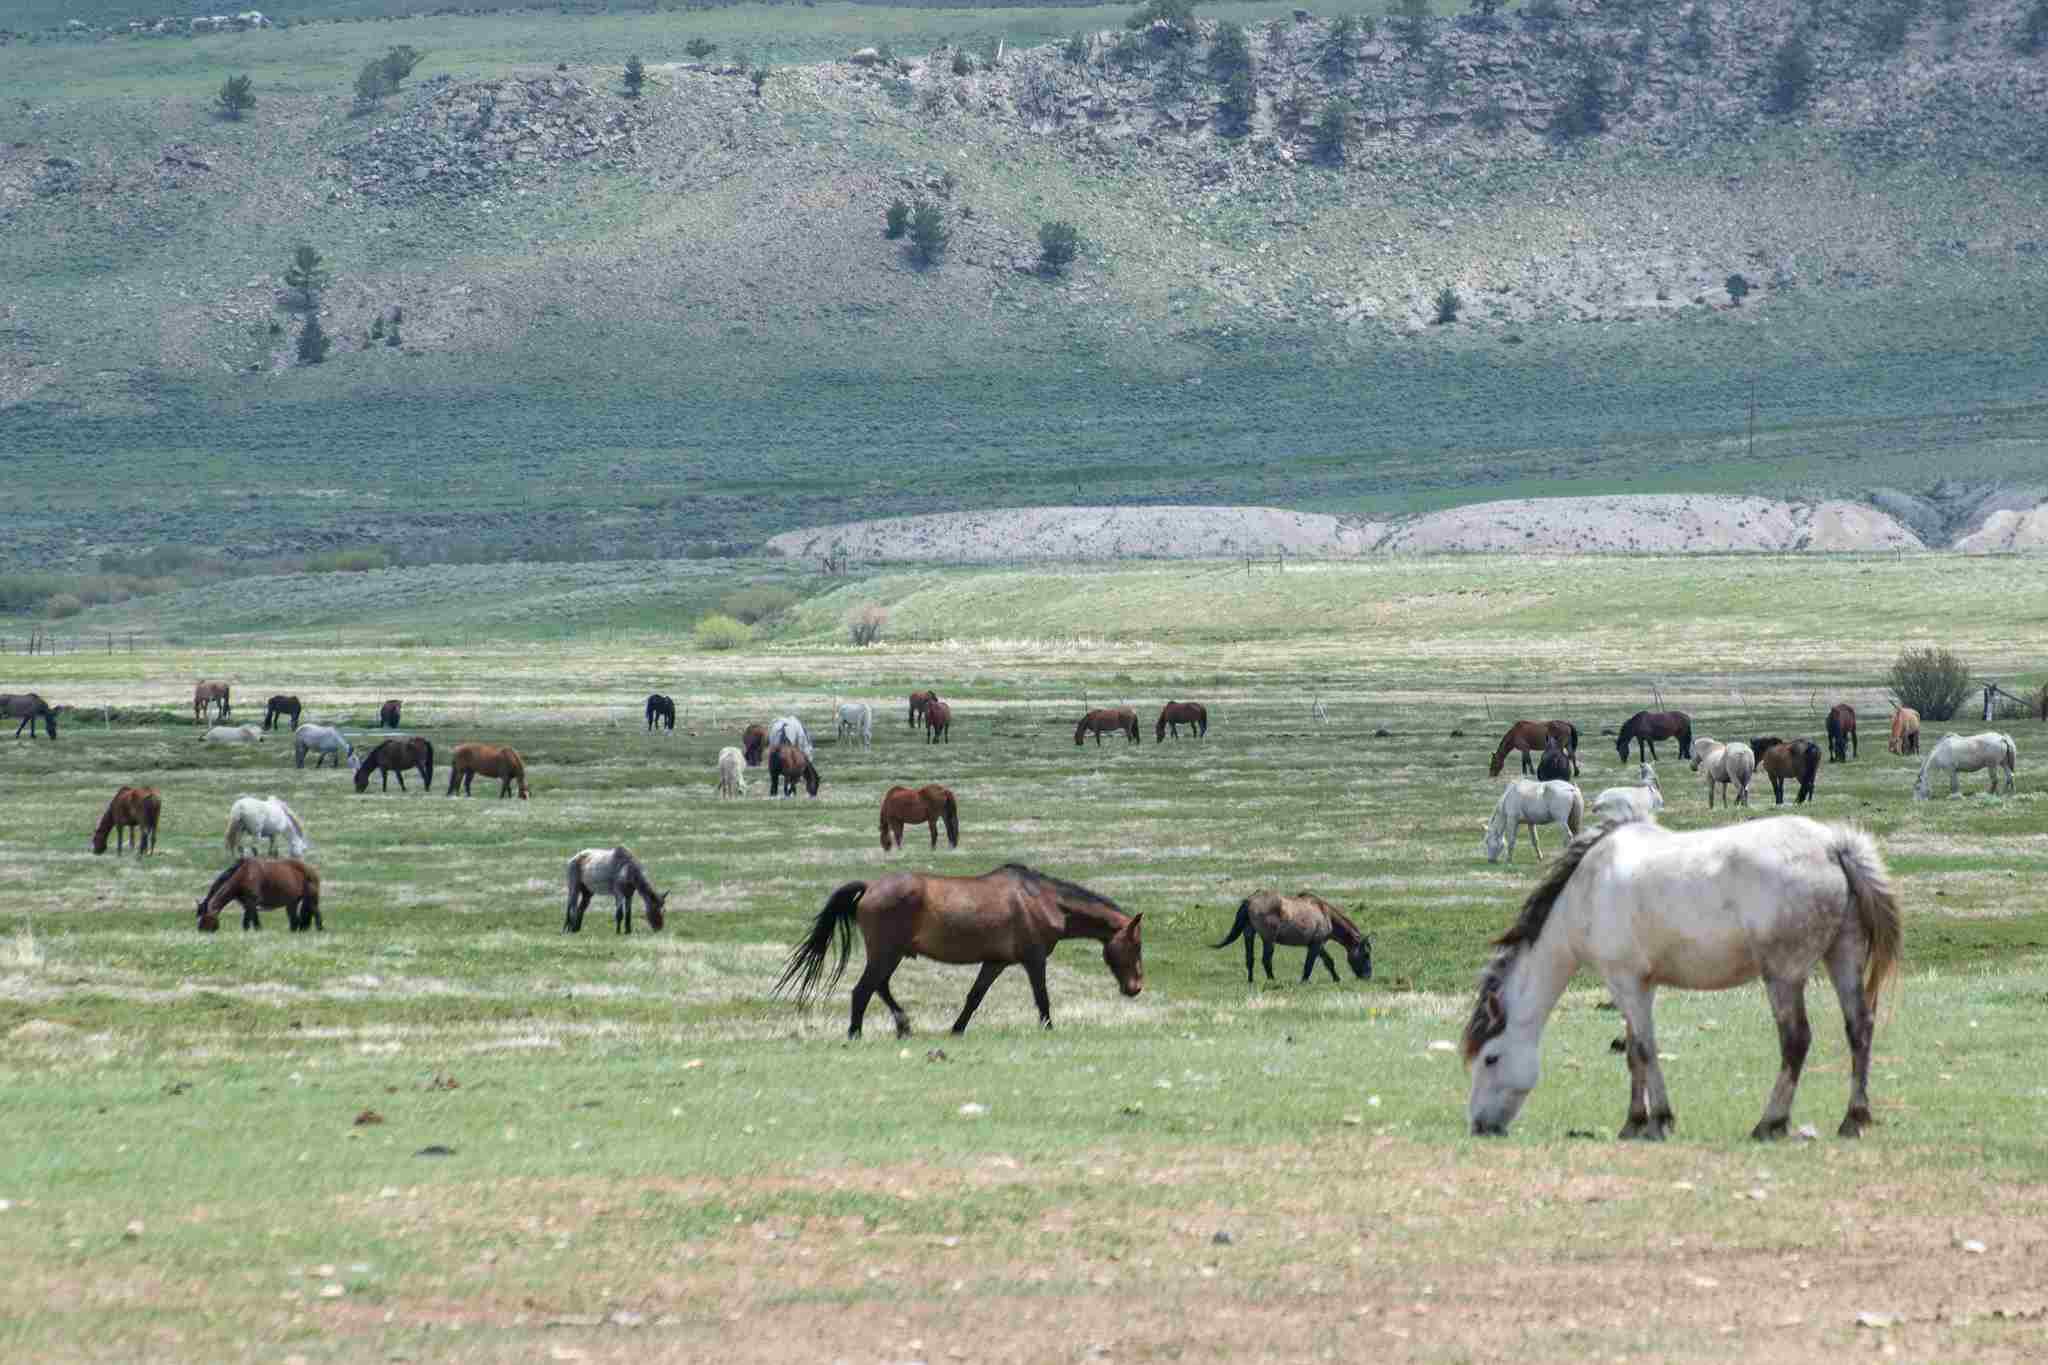 Do Horses Eat Meat: In the Wild, Grasses are a Staple Food Source for Horses (Credit: BLM Wyoming 2019 .CC BY 2.0.)